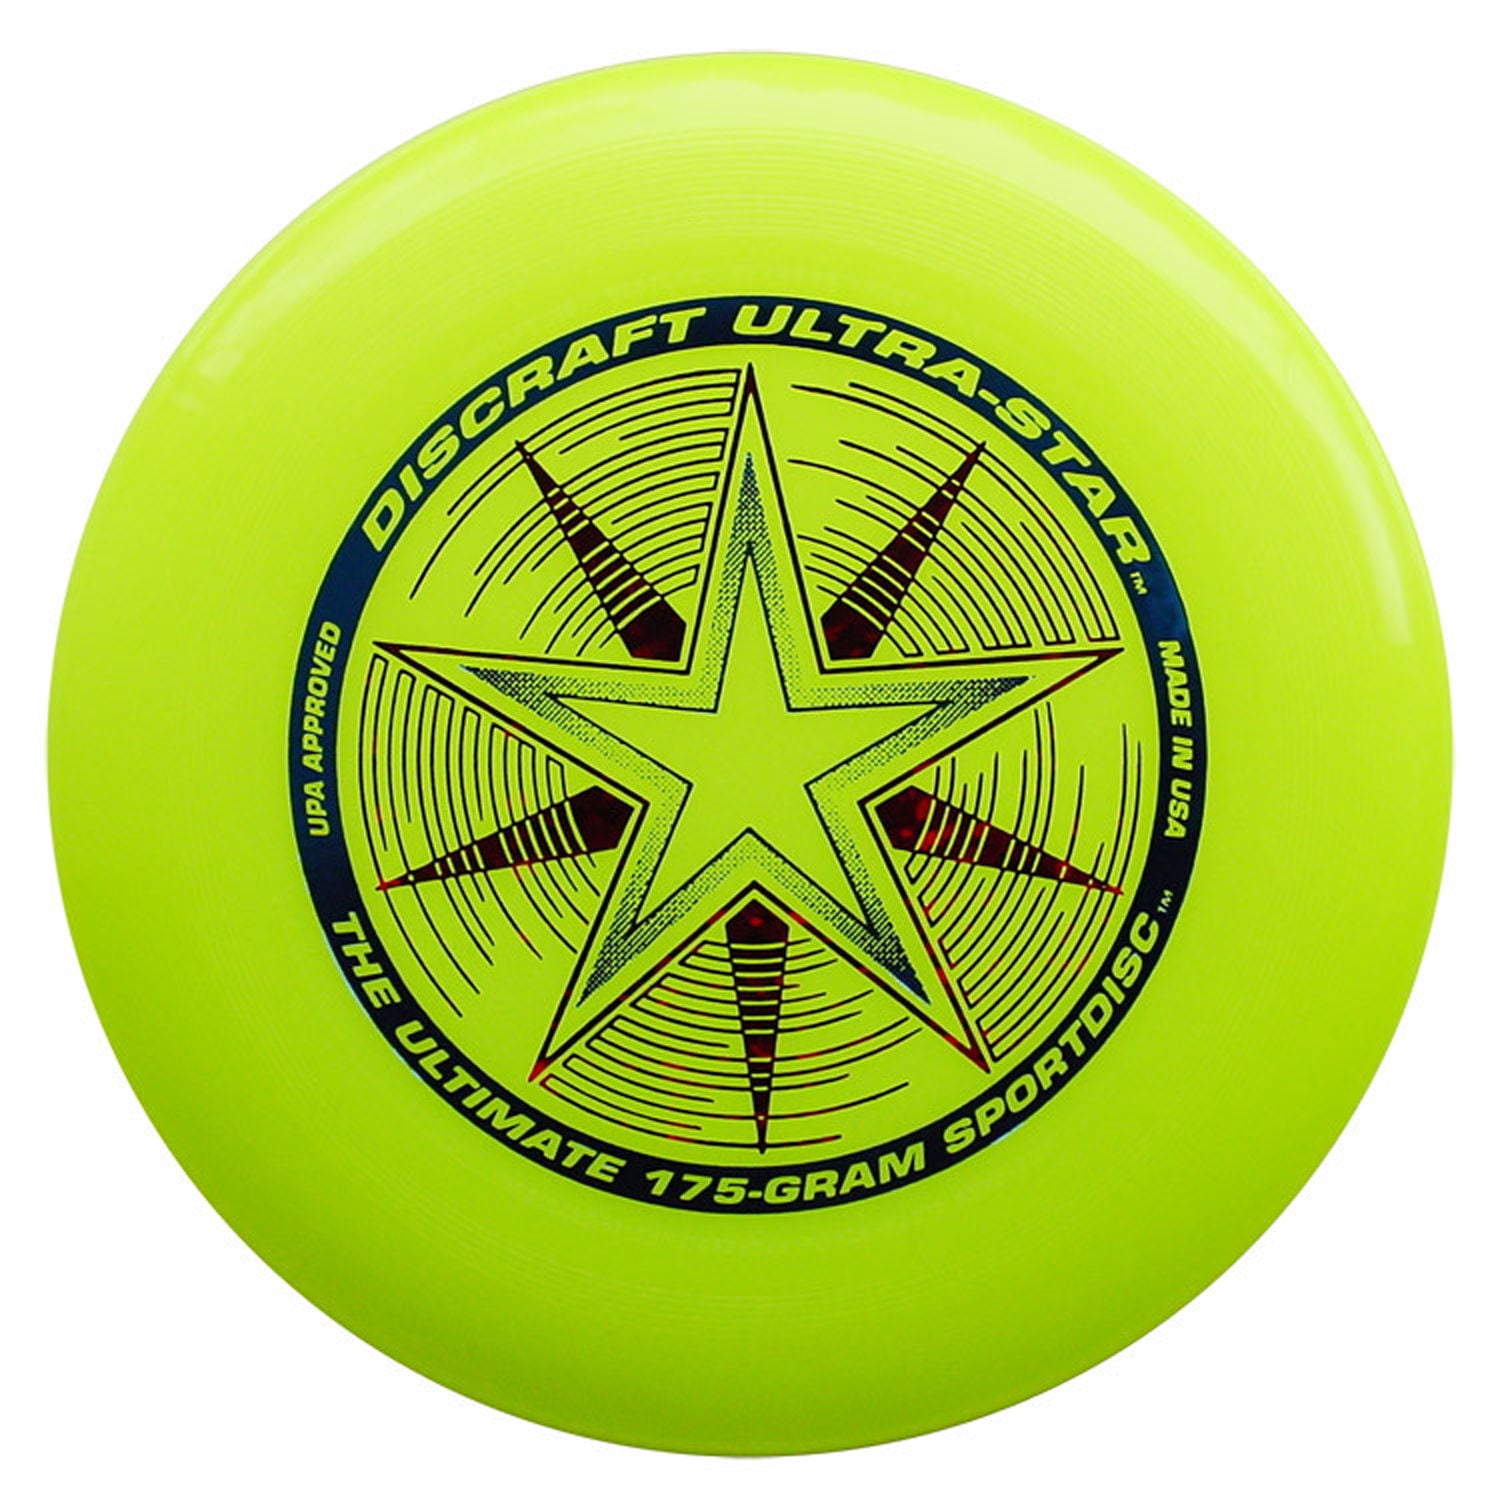 NEW Discraft ULTRA-STAR 175g Ultimate Frisbee Disc BLACK/YELLOW 2 Pack 